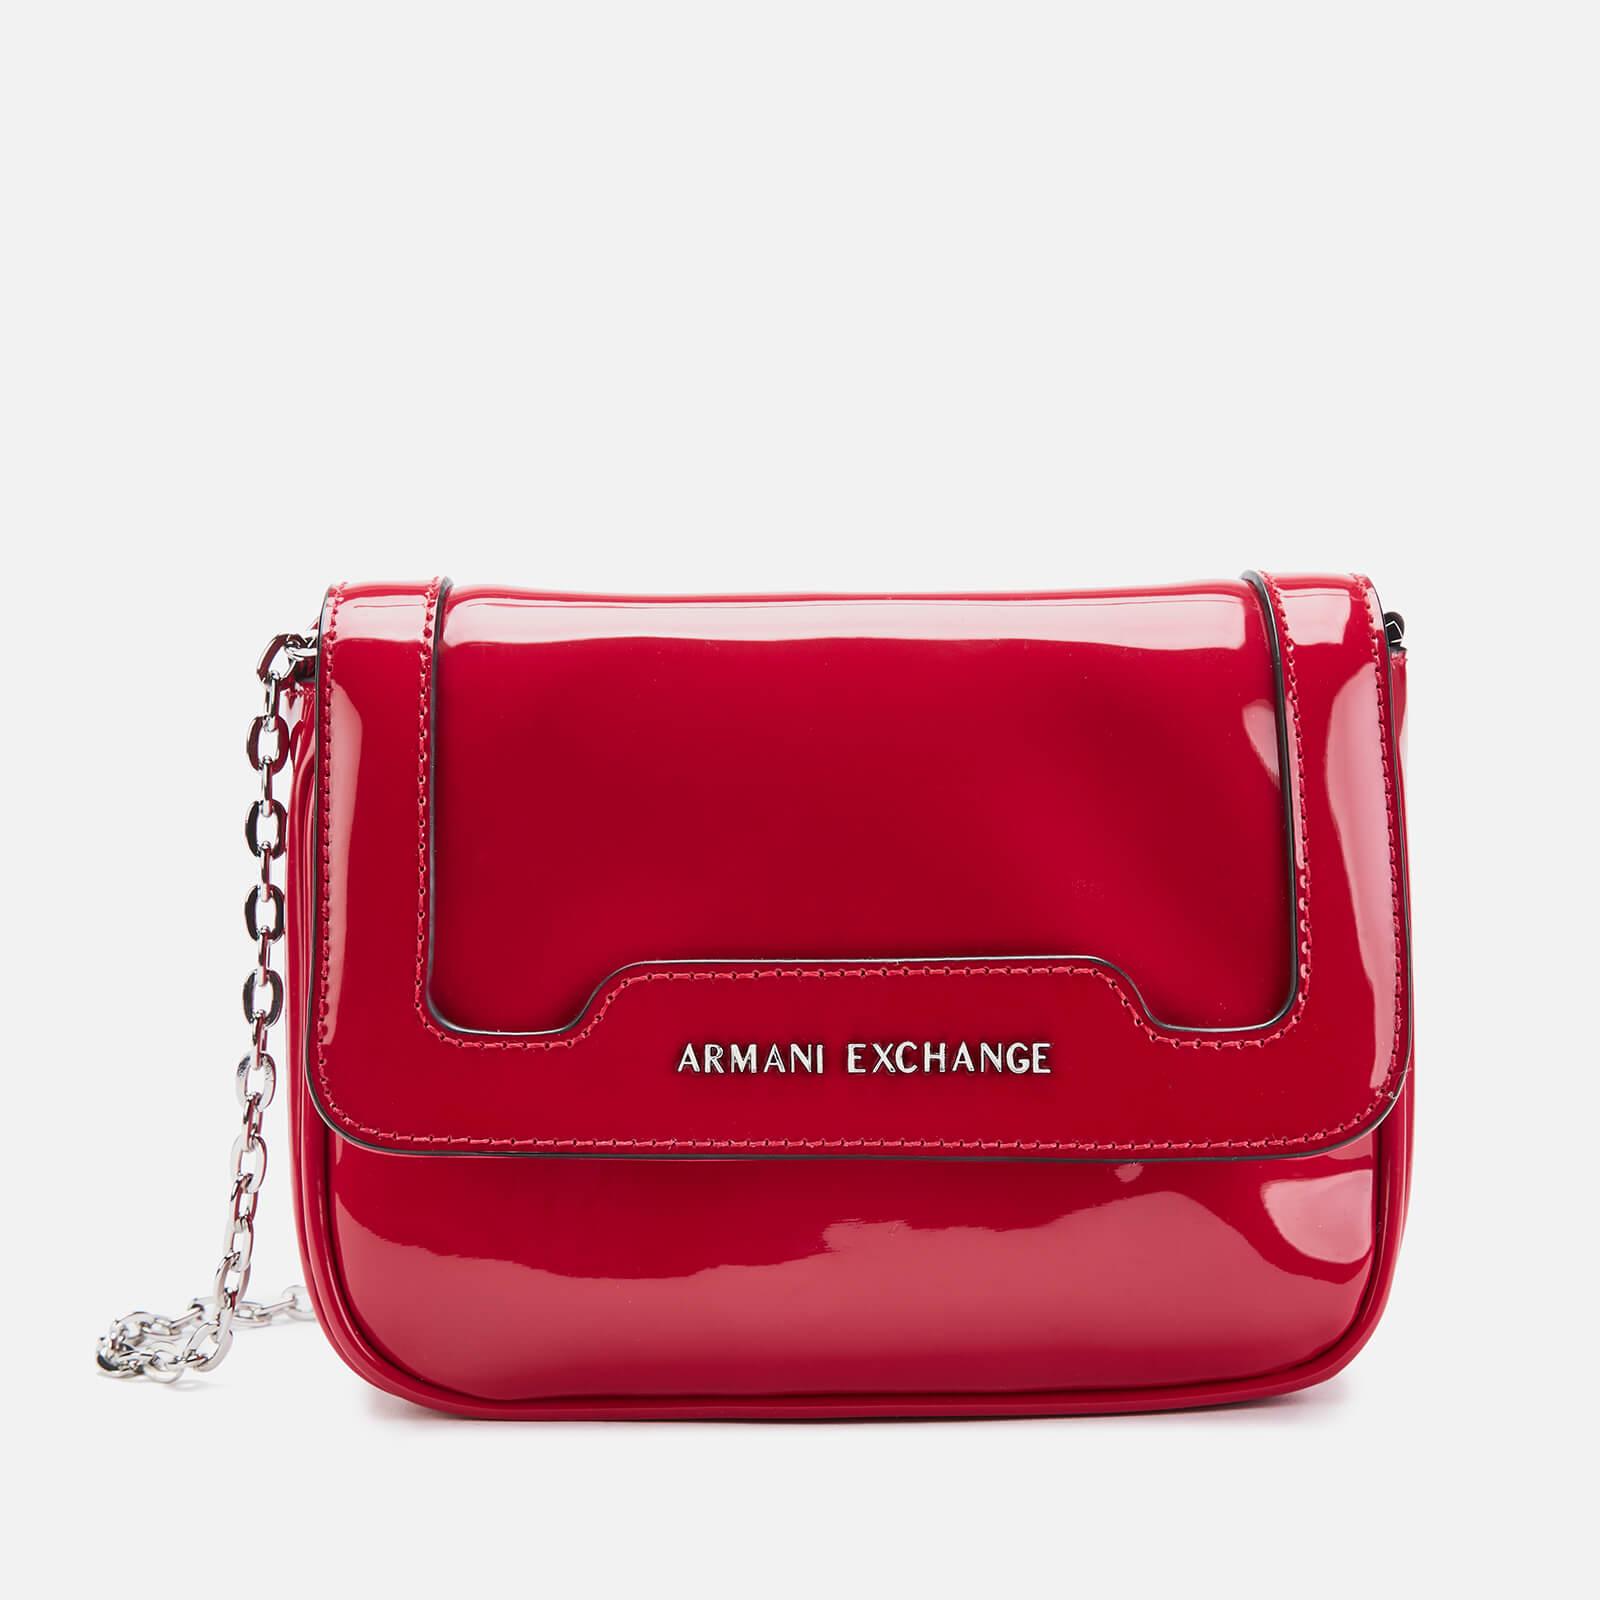 Armani Exchange Patent Small Cross Body Bag in Red - Lyst